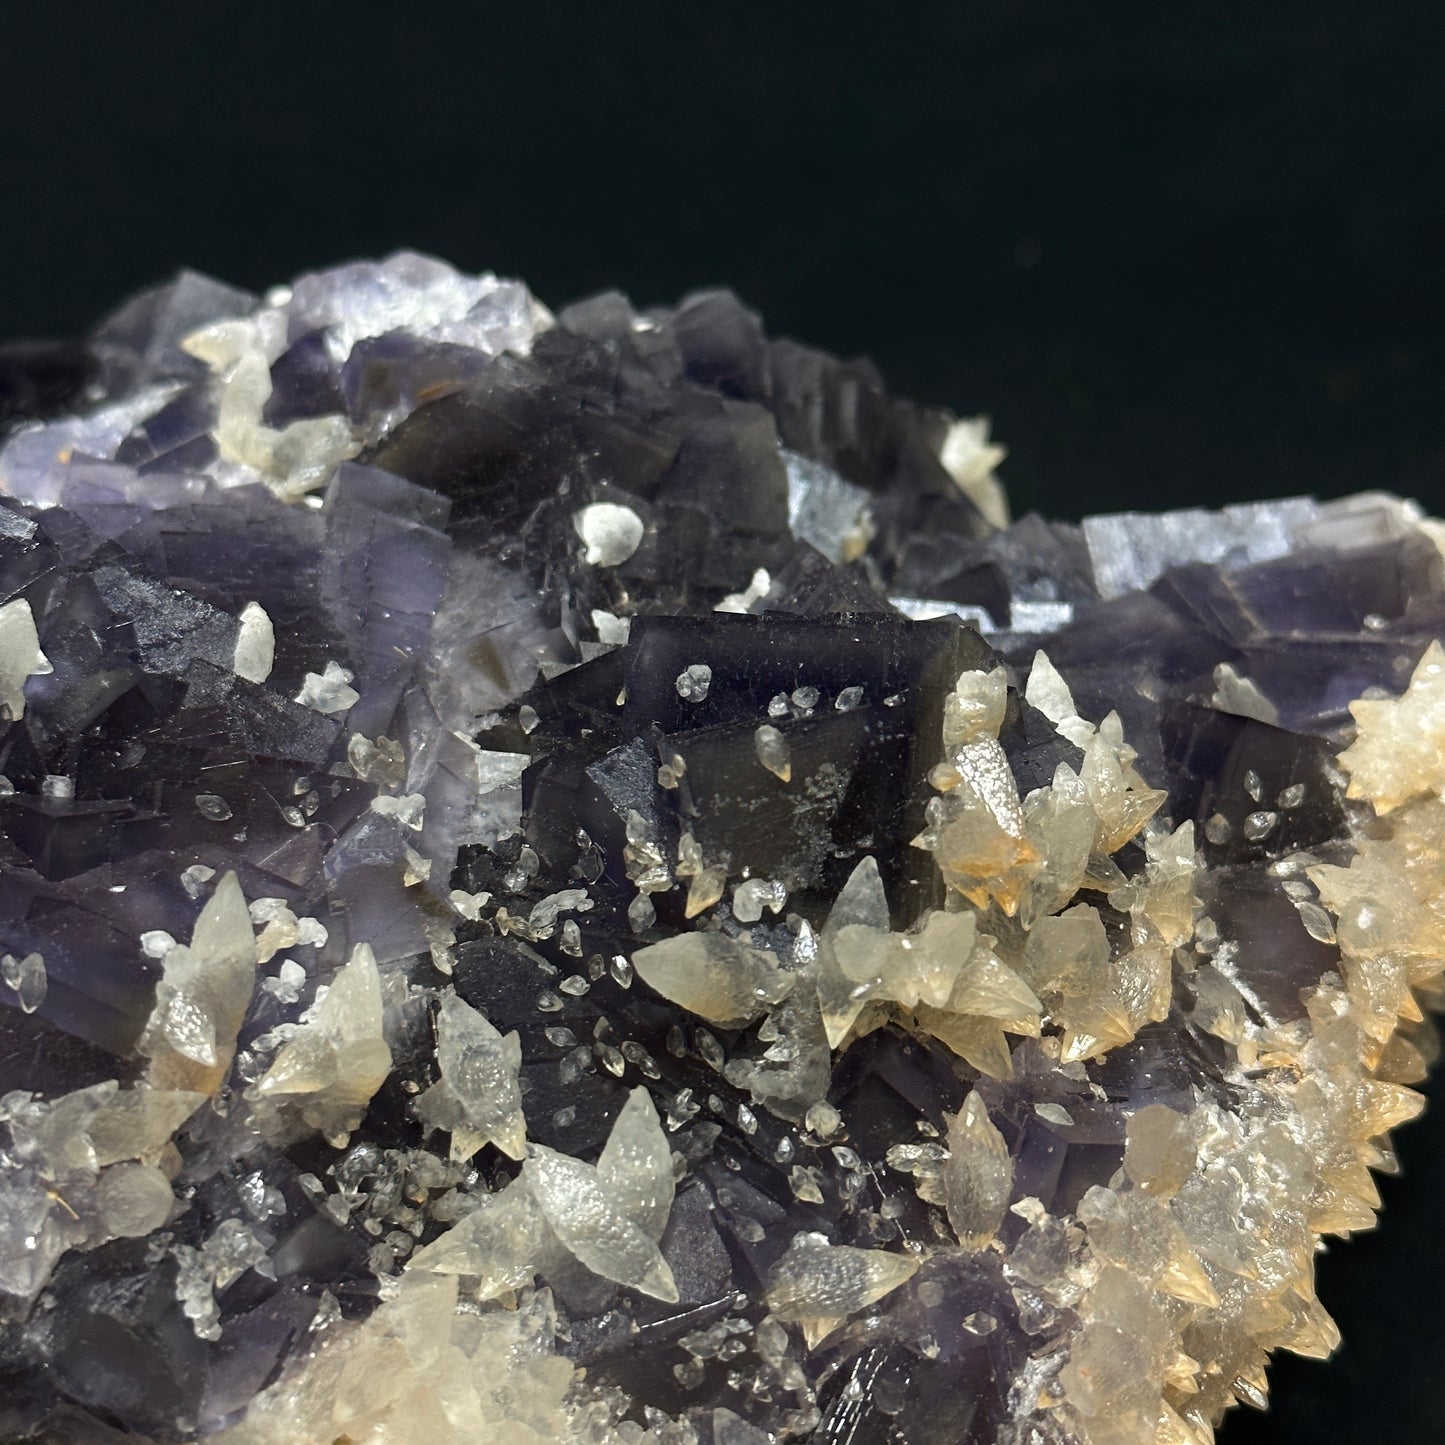 Stunning Dogtooth and Fluorite Cluster